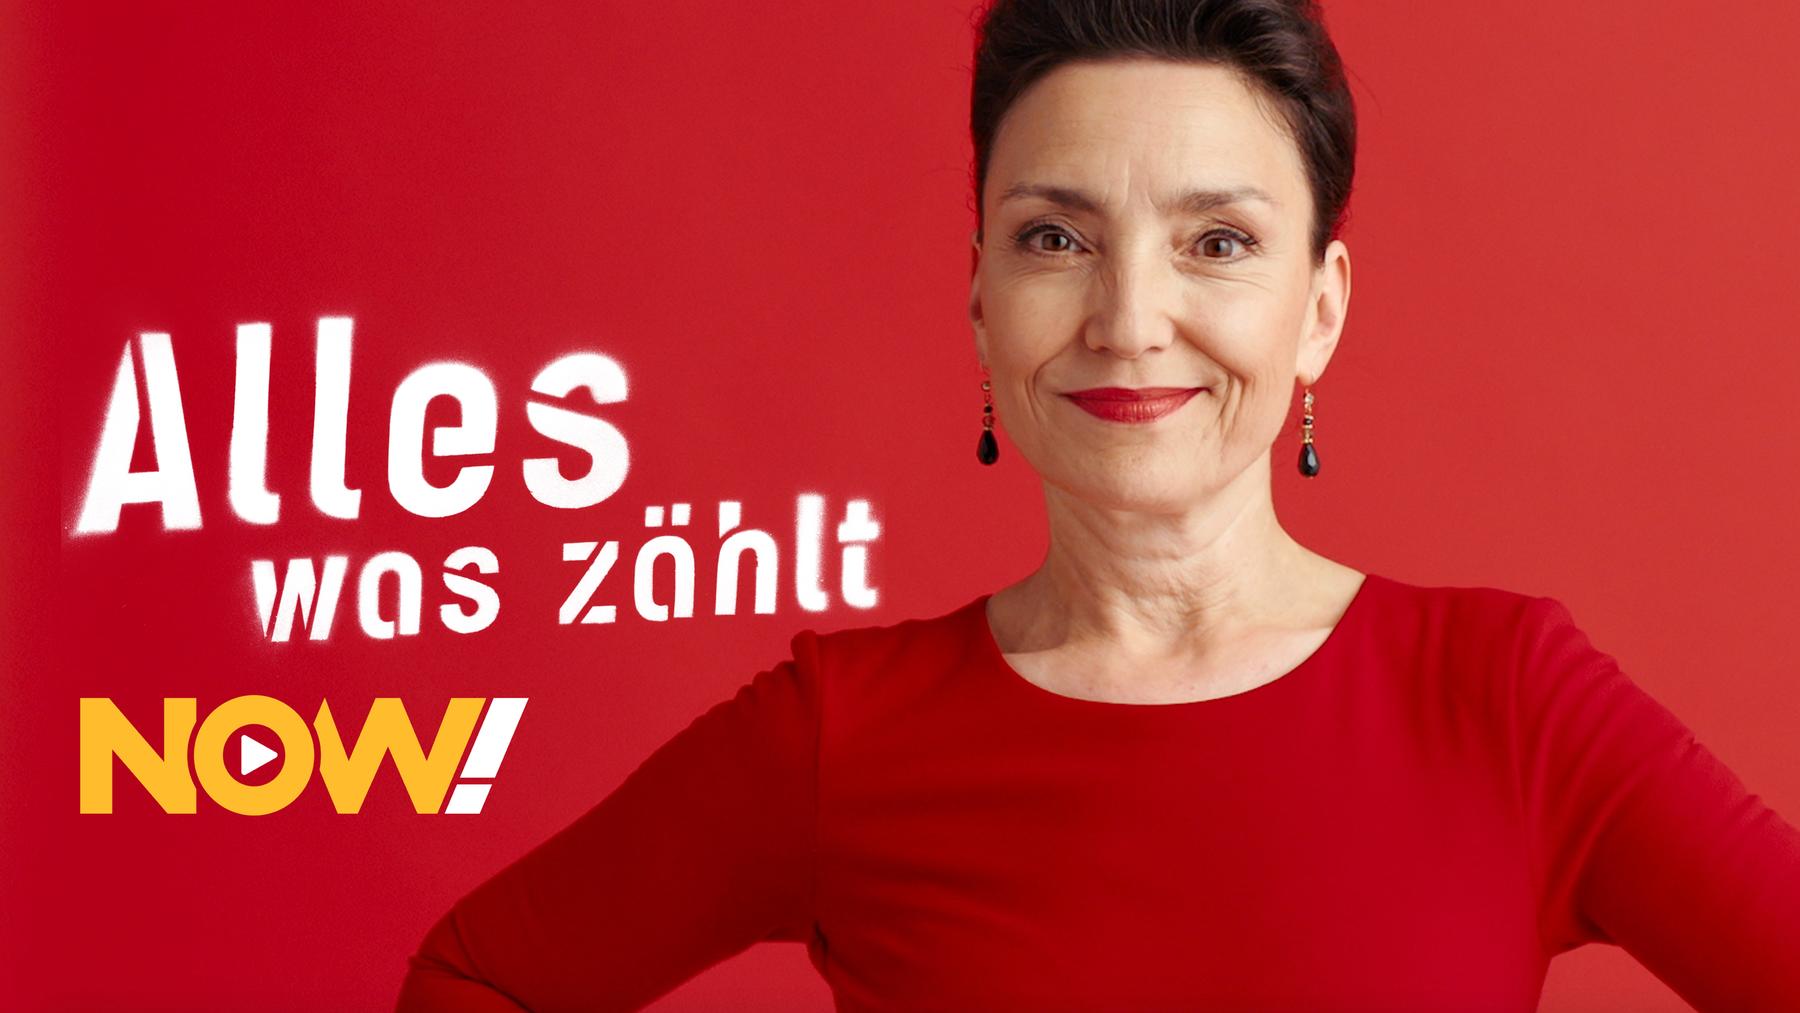 Alles was zählt - NOW!